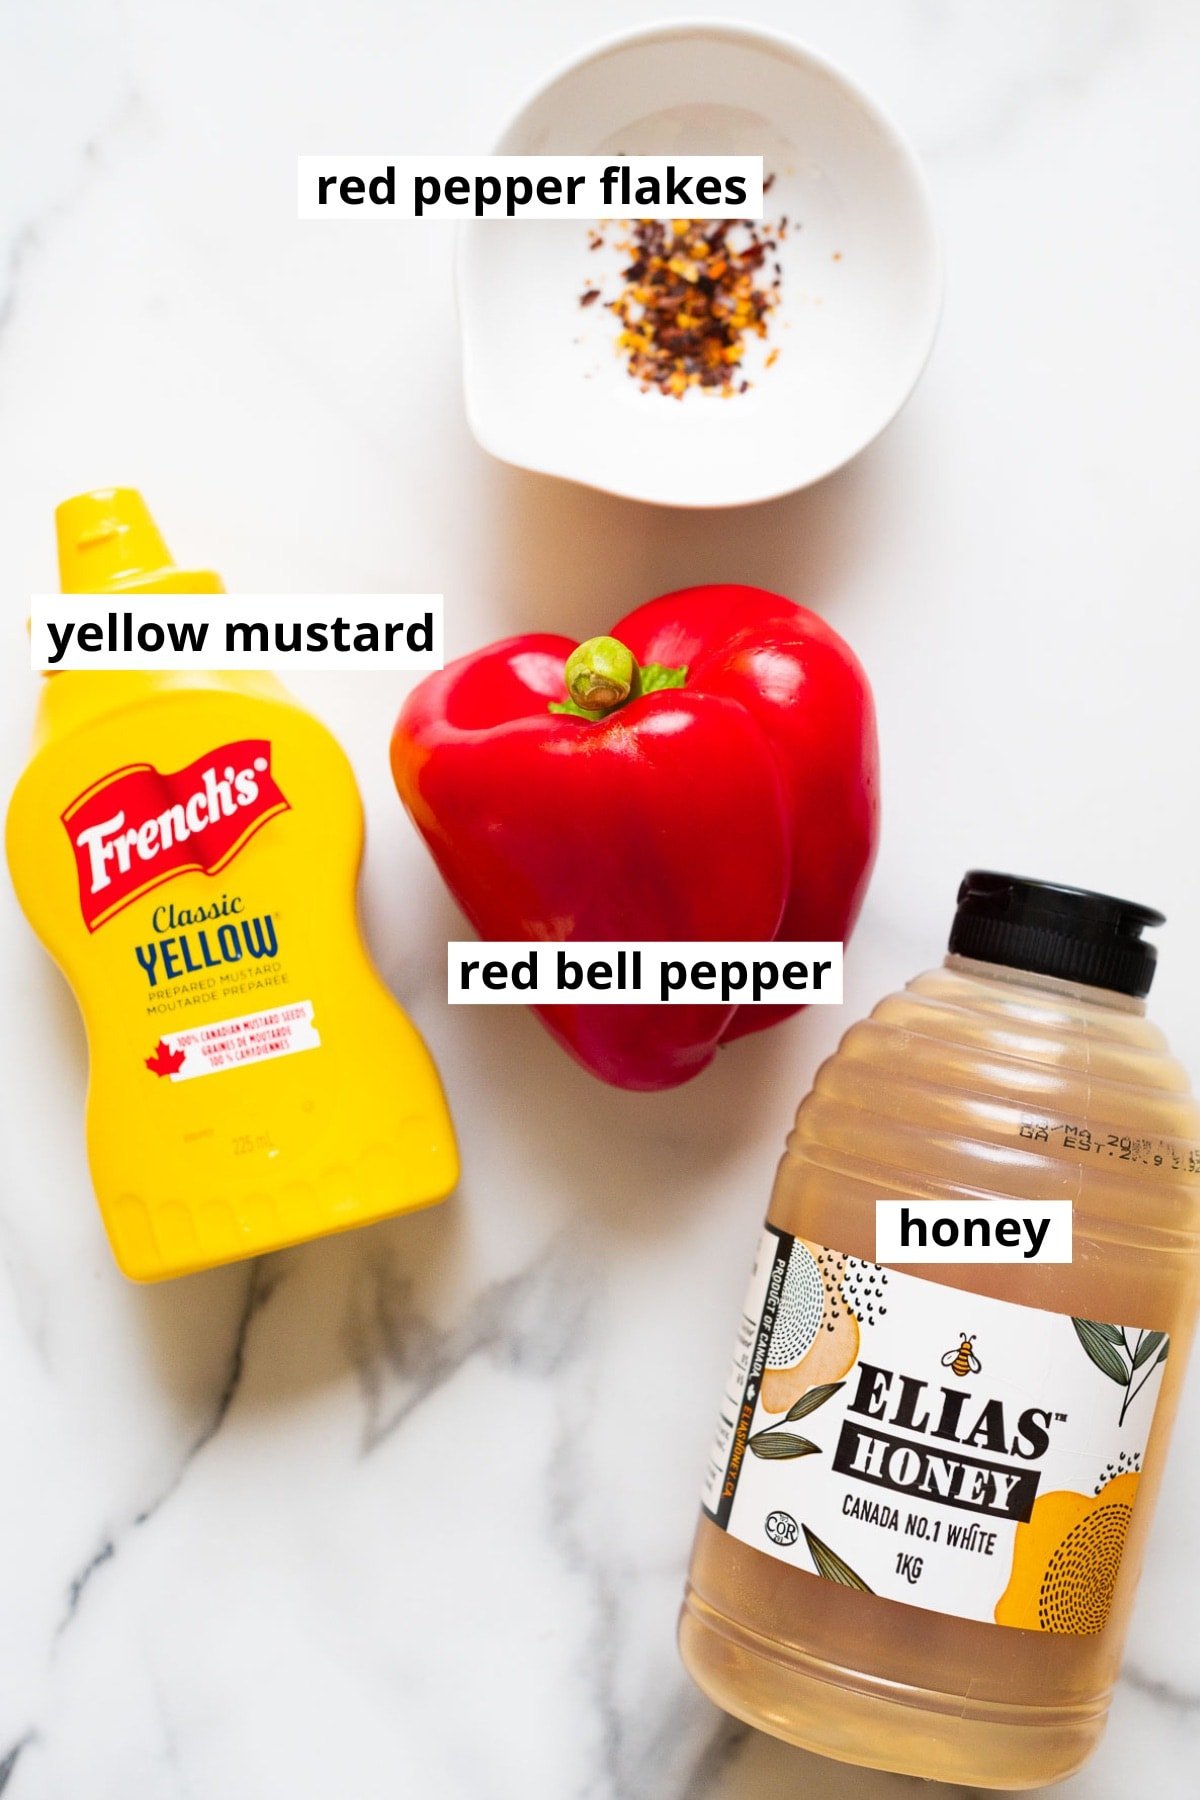 Red bell pepper, red pepper flakes, yellow mustard, honey.